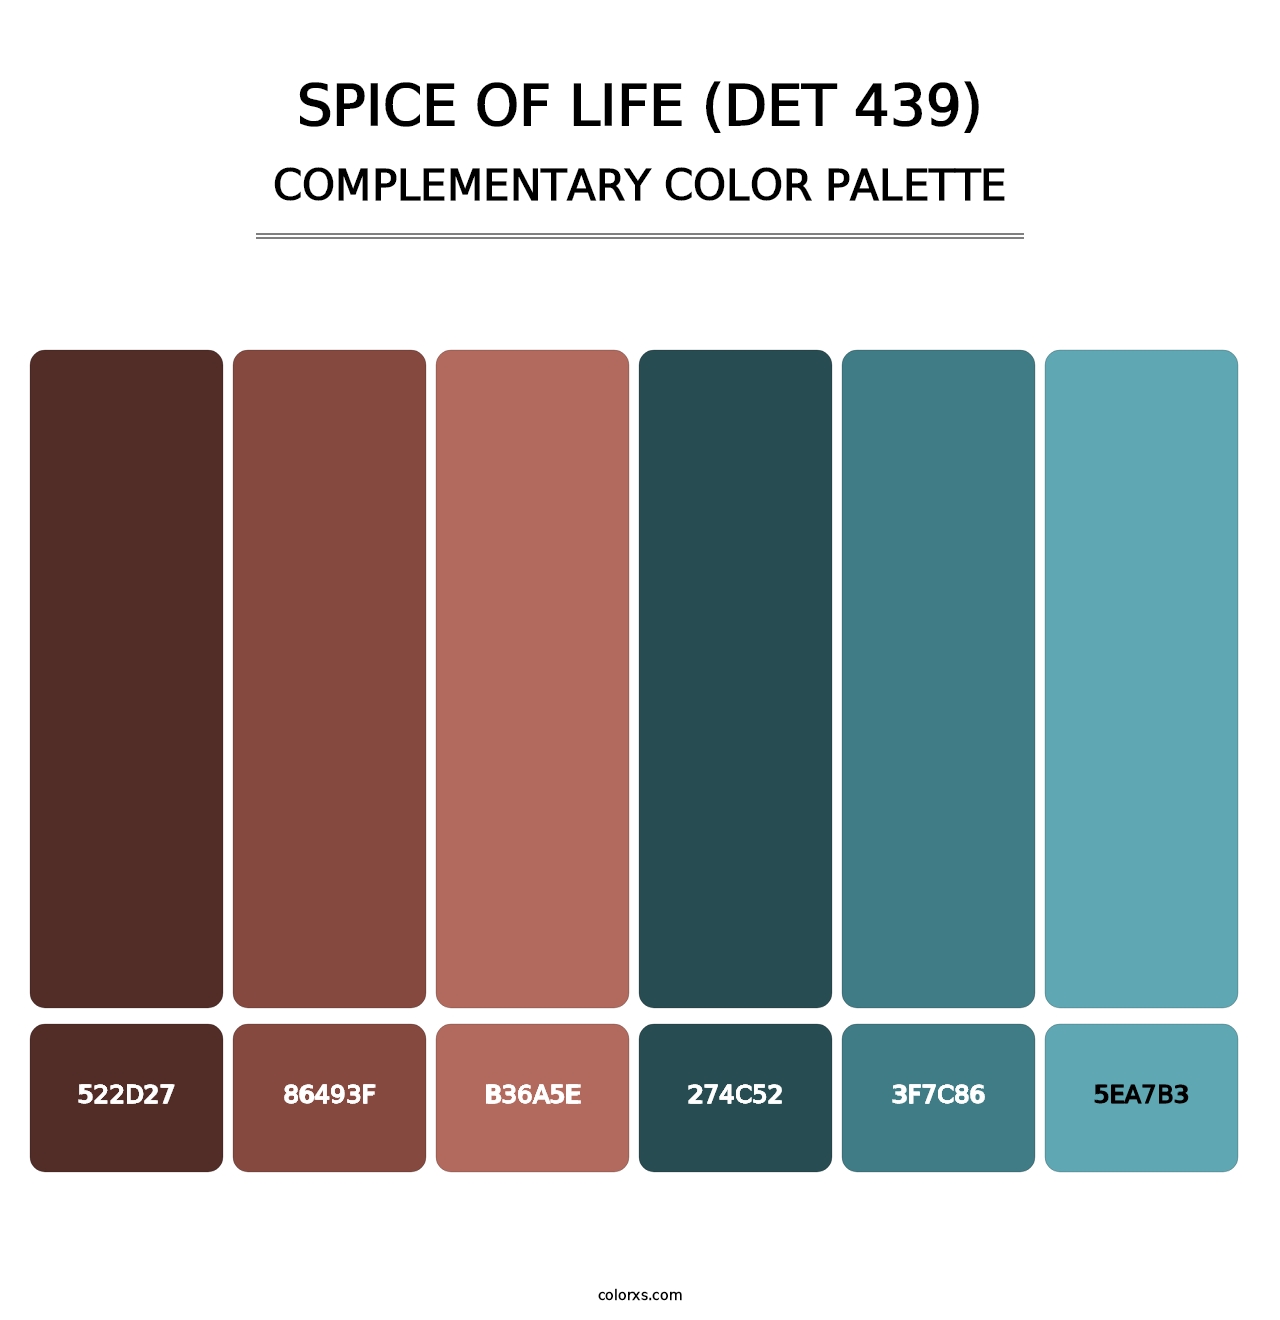 Spice of Life (DET 439) - Complementary Color Palette